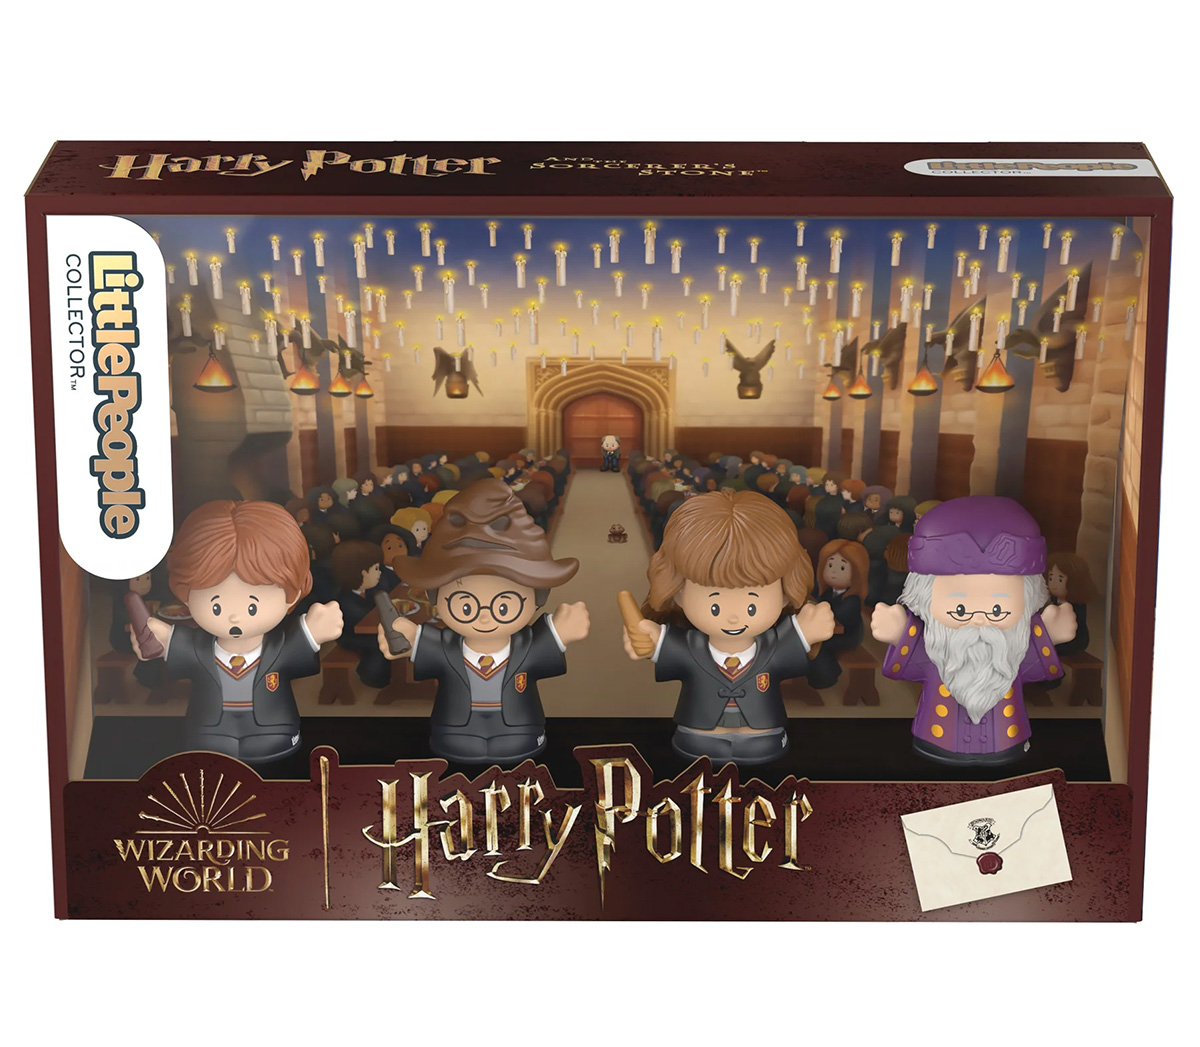 Little People Collector Harry Potter: Sorcerer's Stone and the Chamber of Secrets dolls